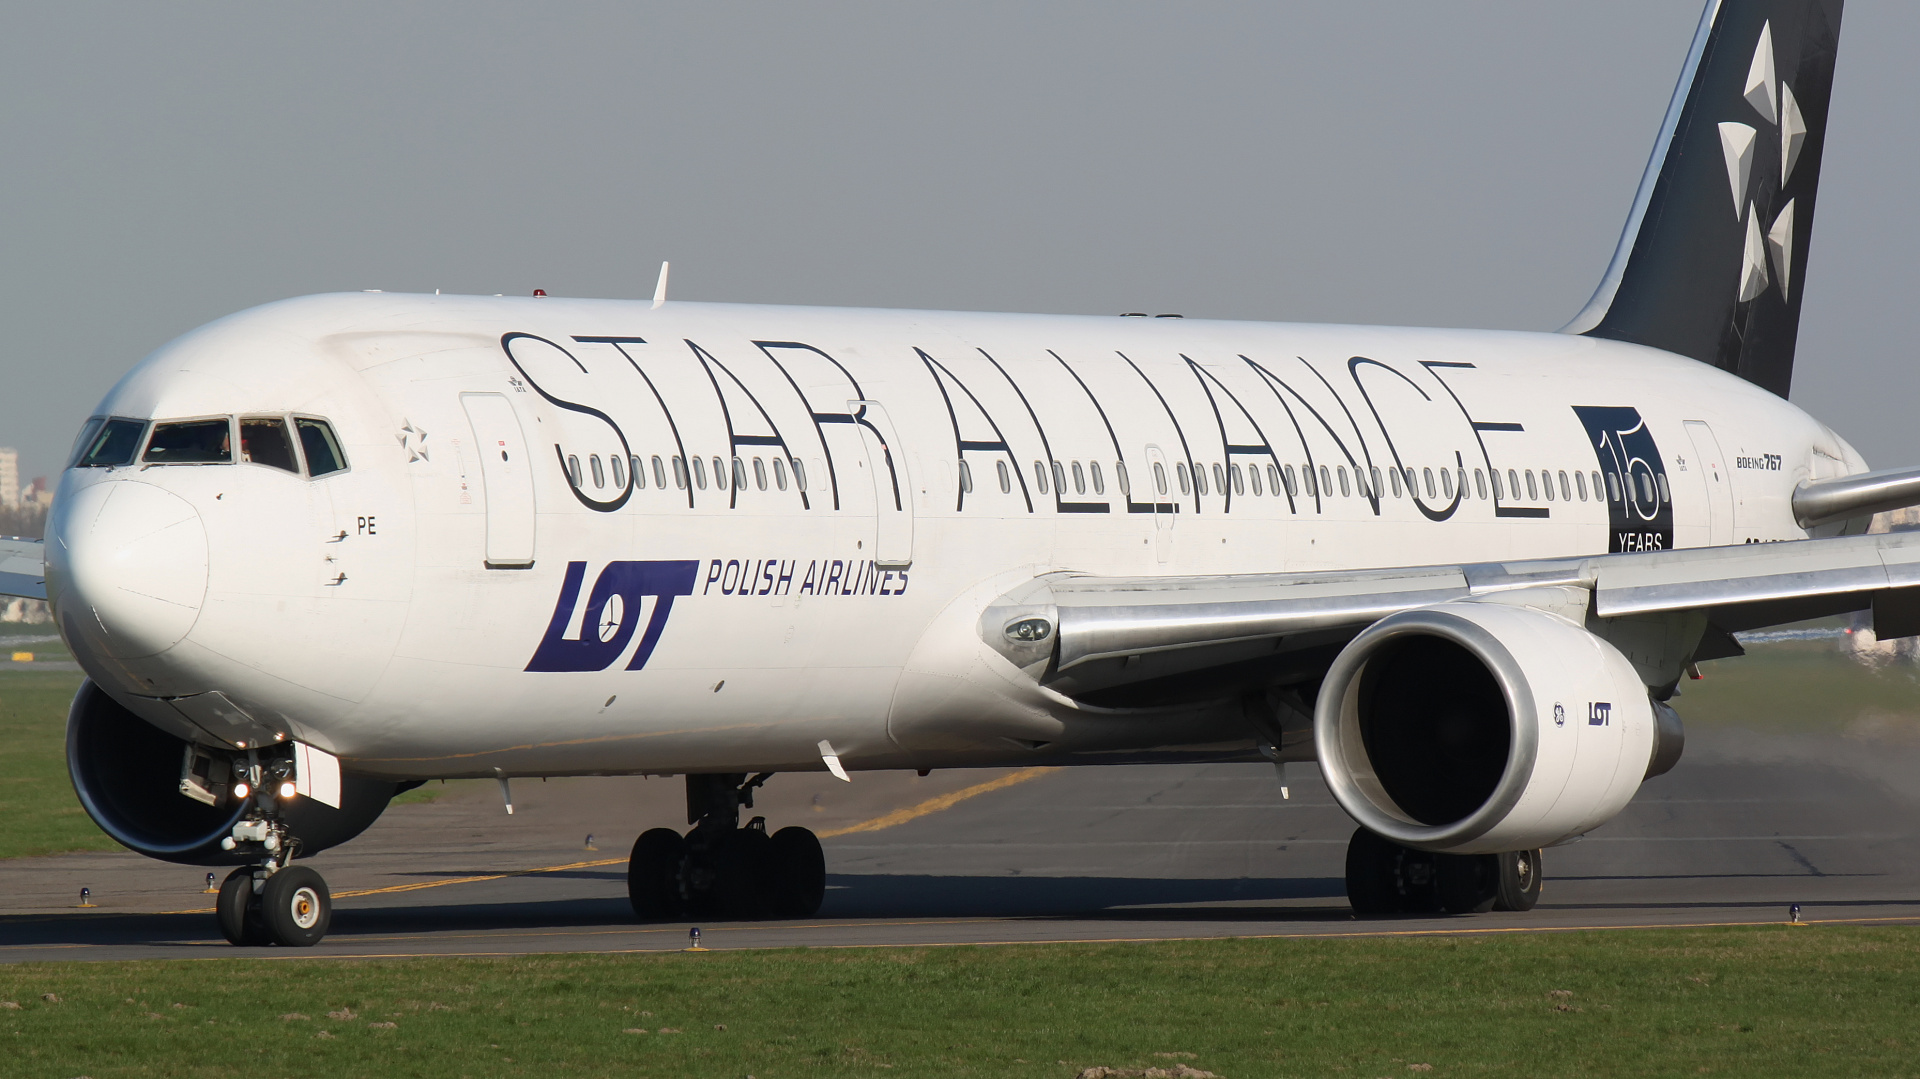 SP-LPE (Star Alliance - 15 Years livery) (Aircraft » EPWA Spotting » Boeing 767-300 » LOT Polish Airlines)